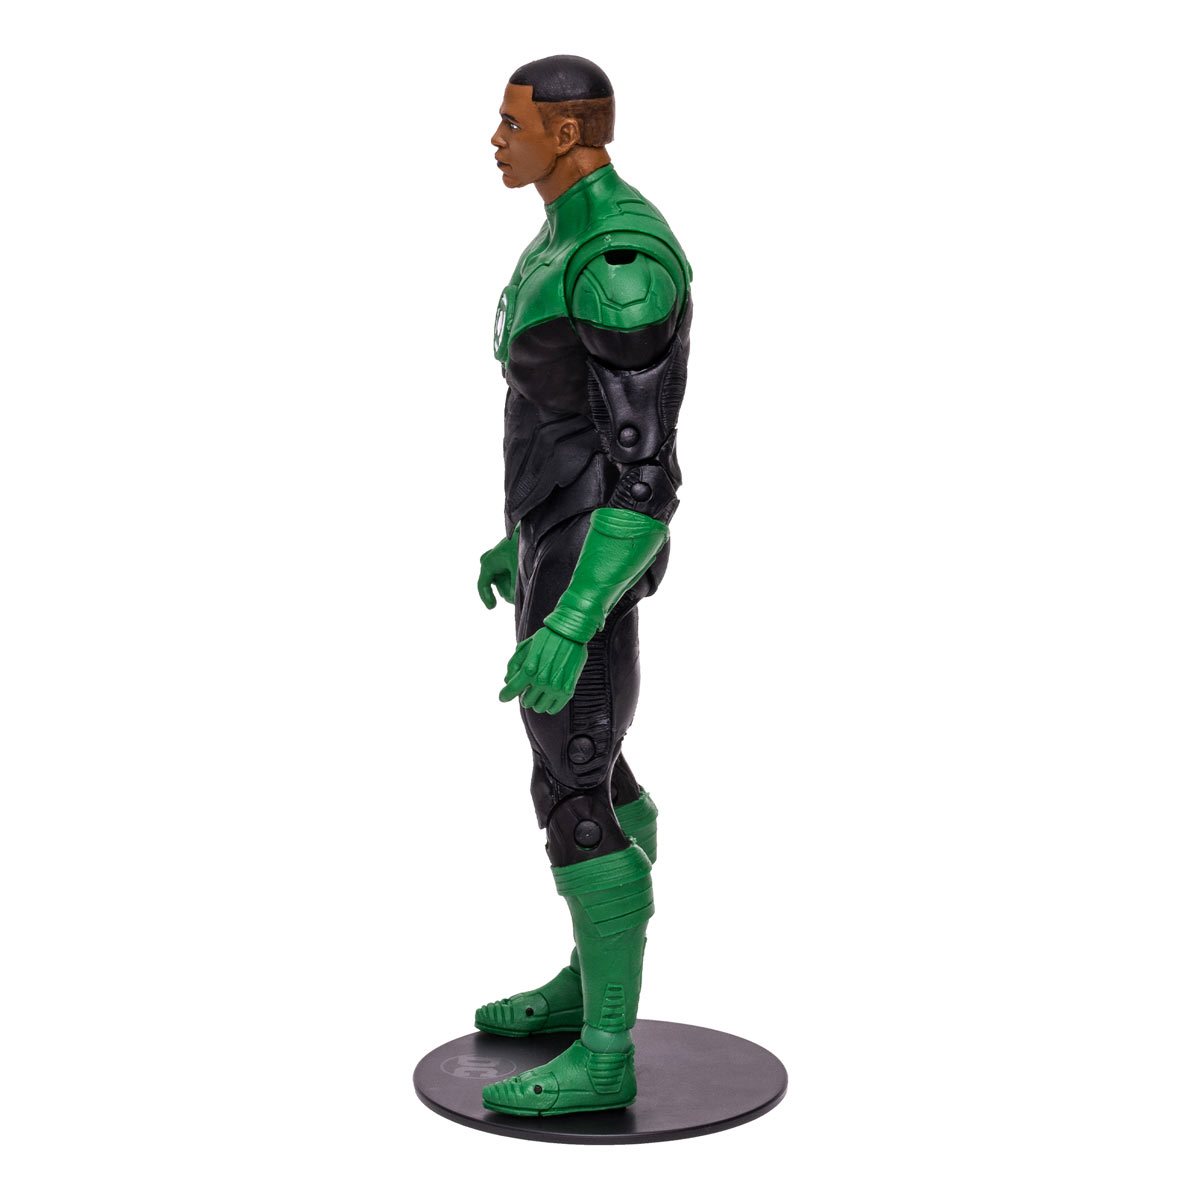 DC Unlimited 6 Inch Action Figure Series 4 ~ Injustice Green Lantern 